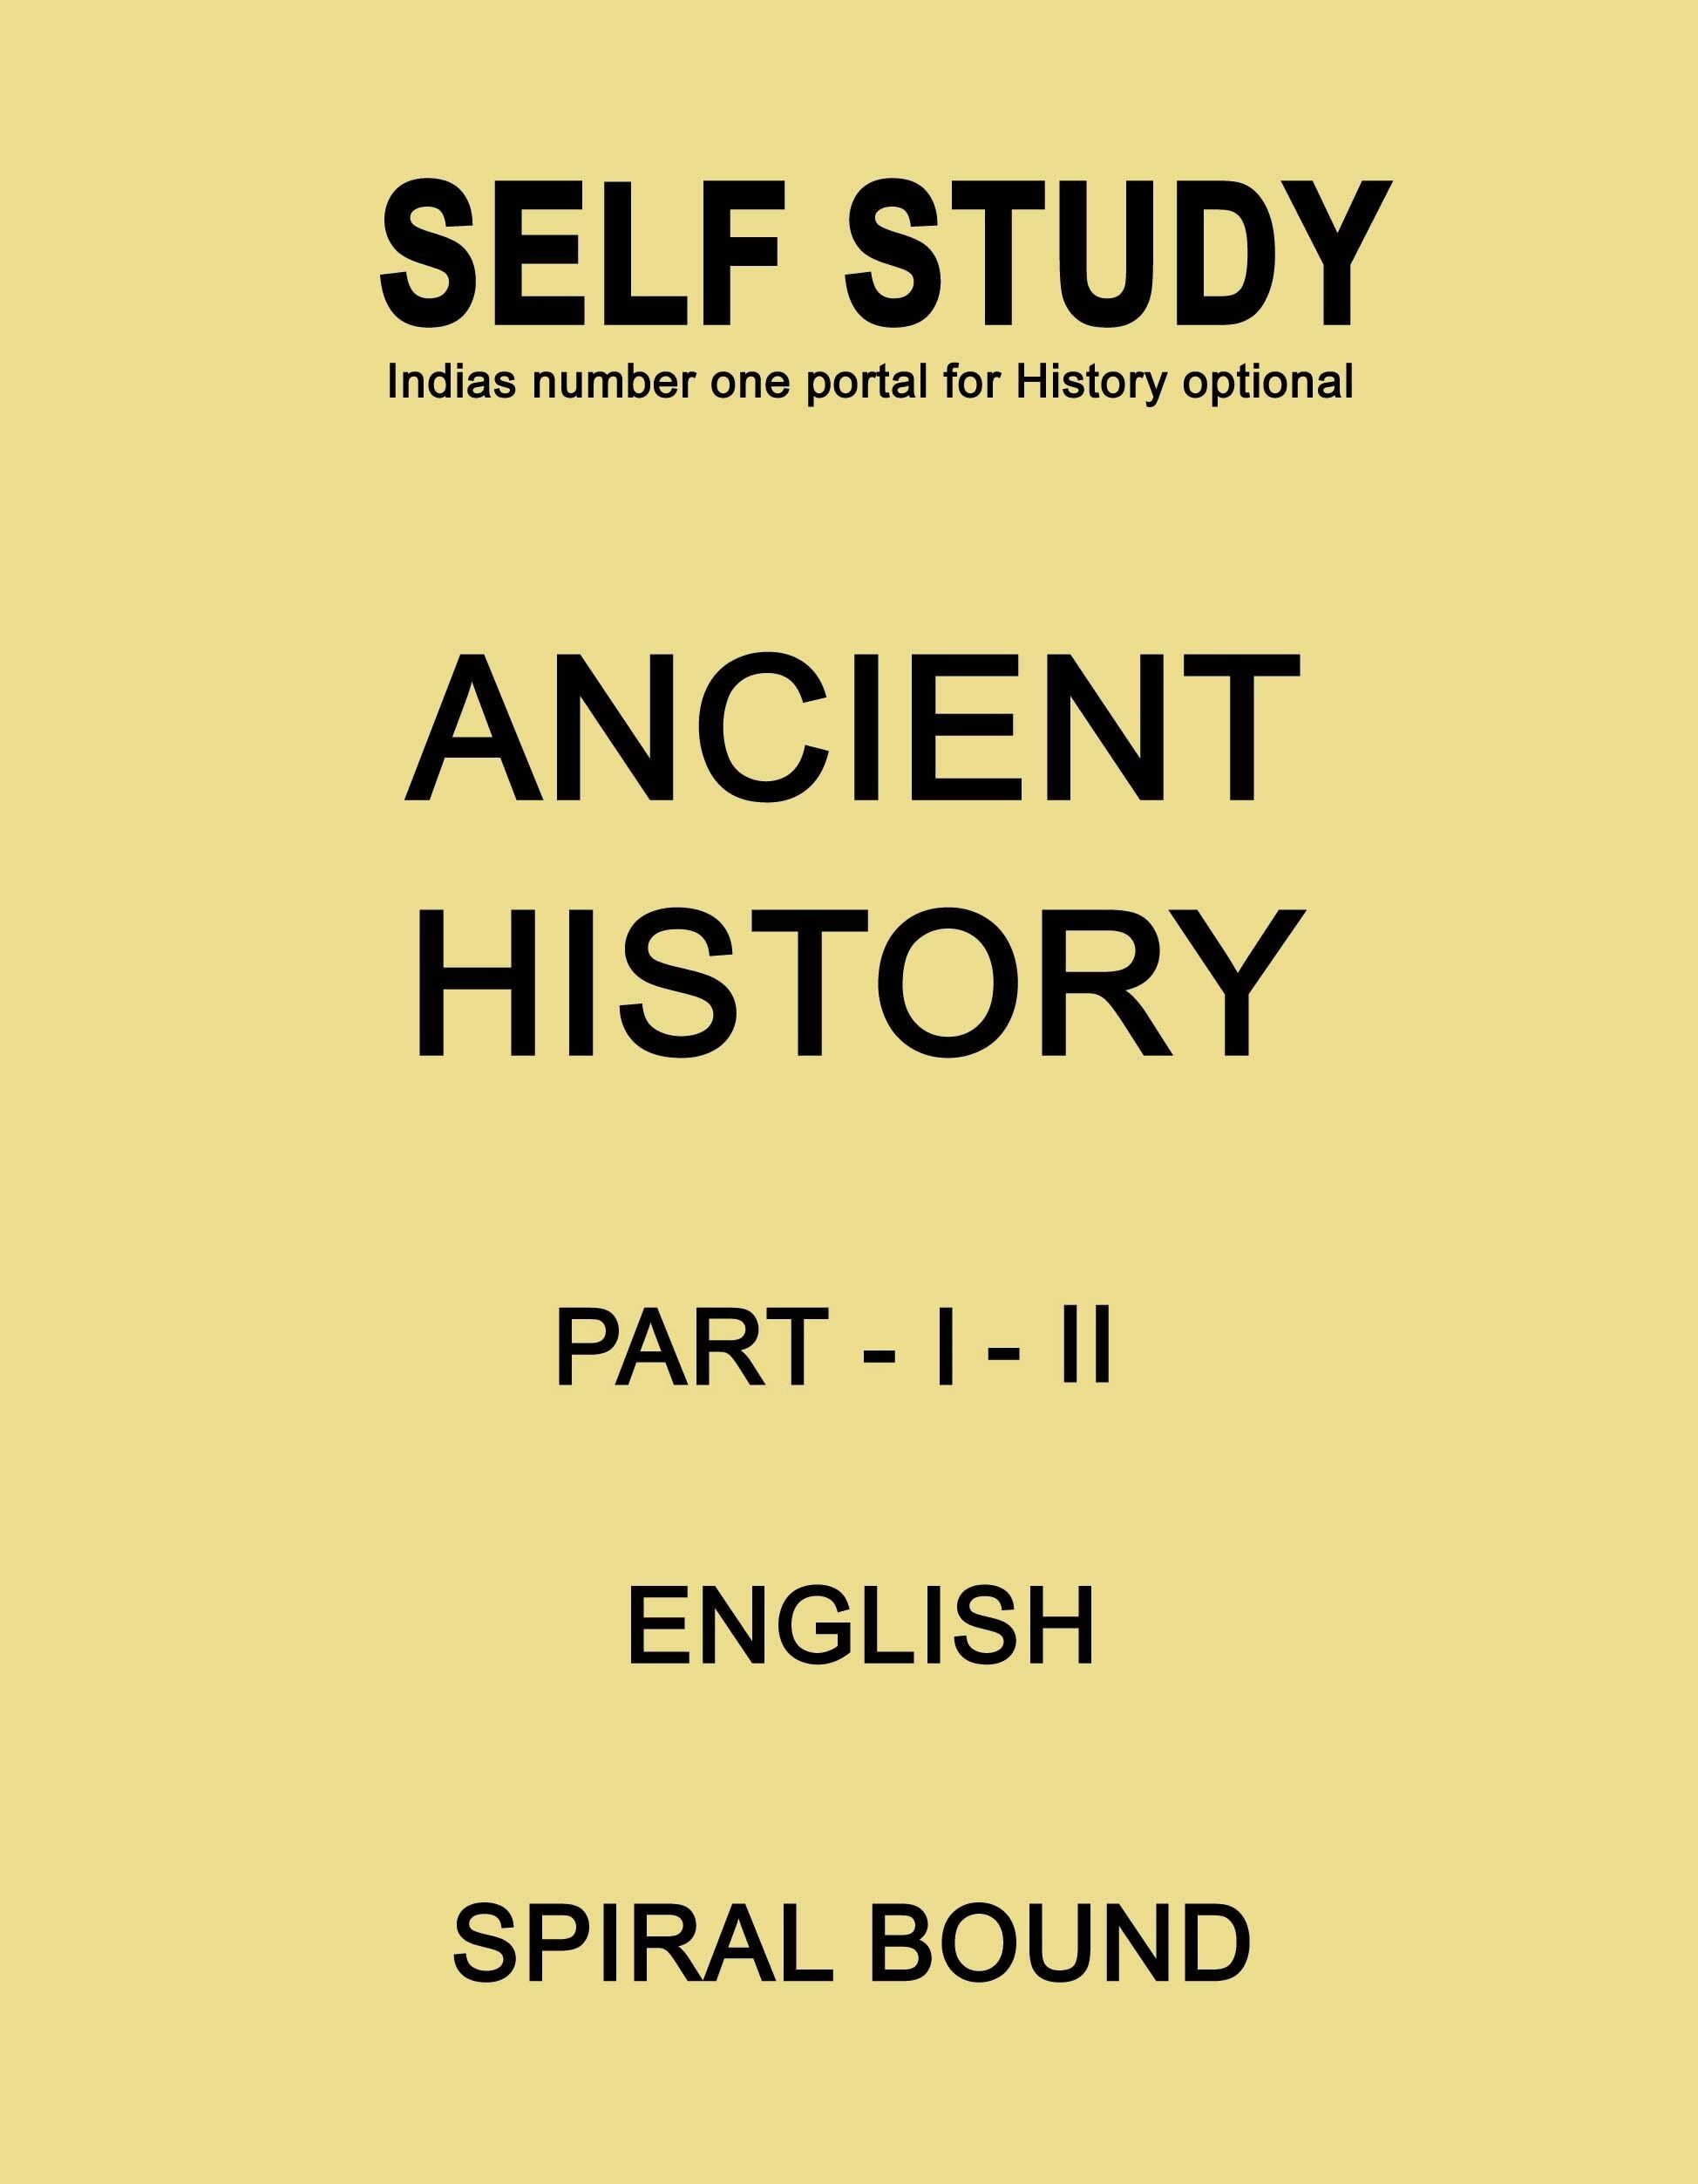 ancient-history-part-1-and-2-printed-notes-by-self-study-in-english-for-ias-mains